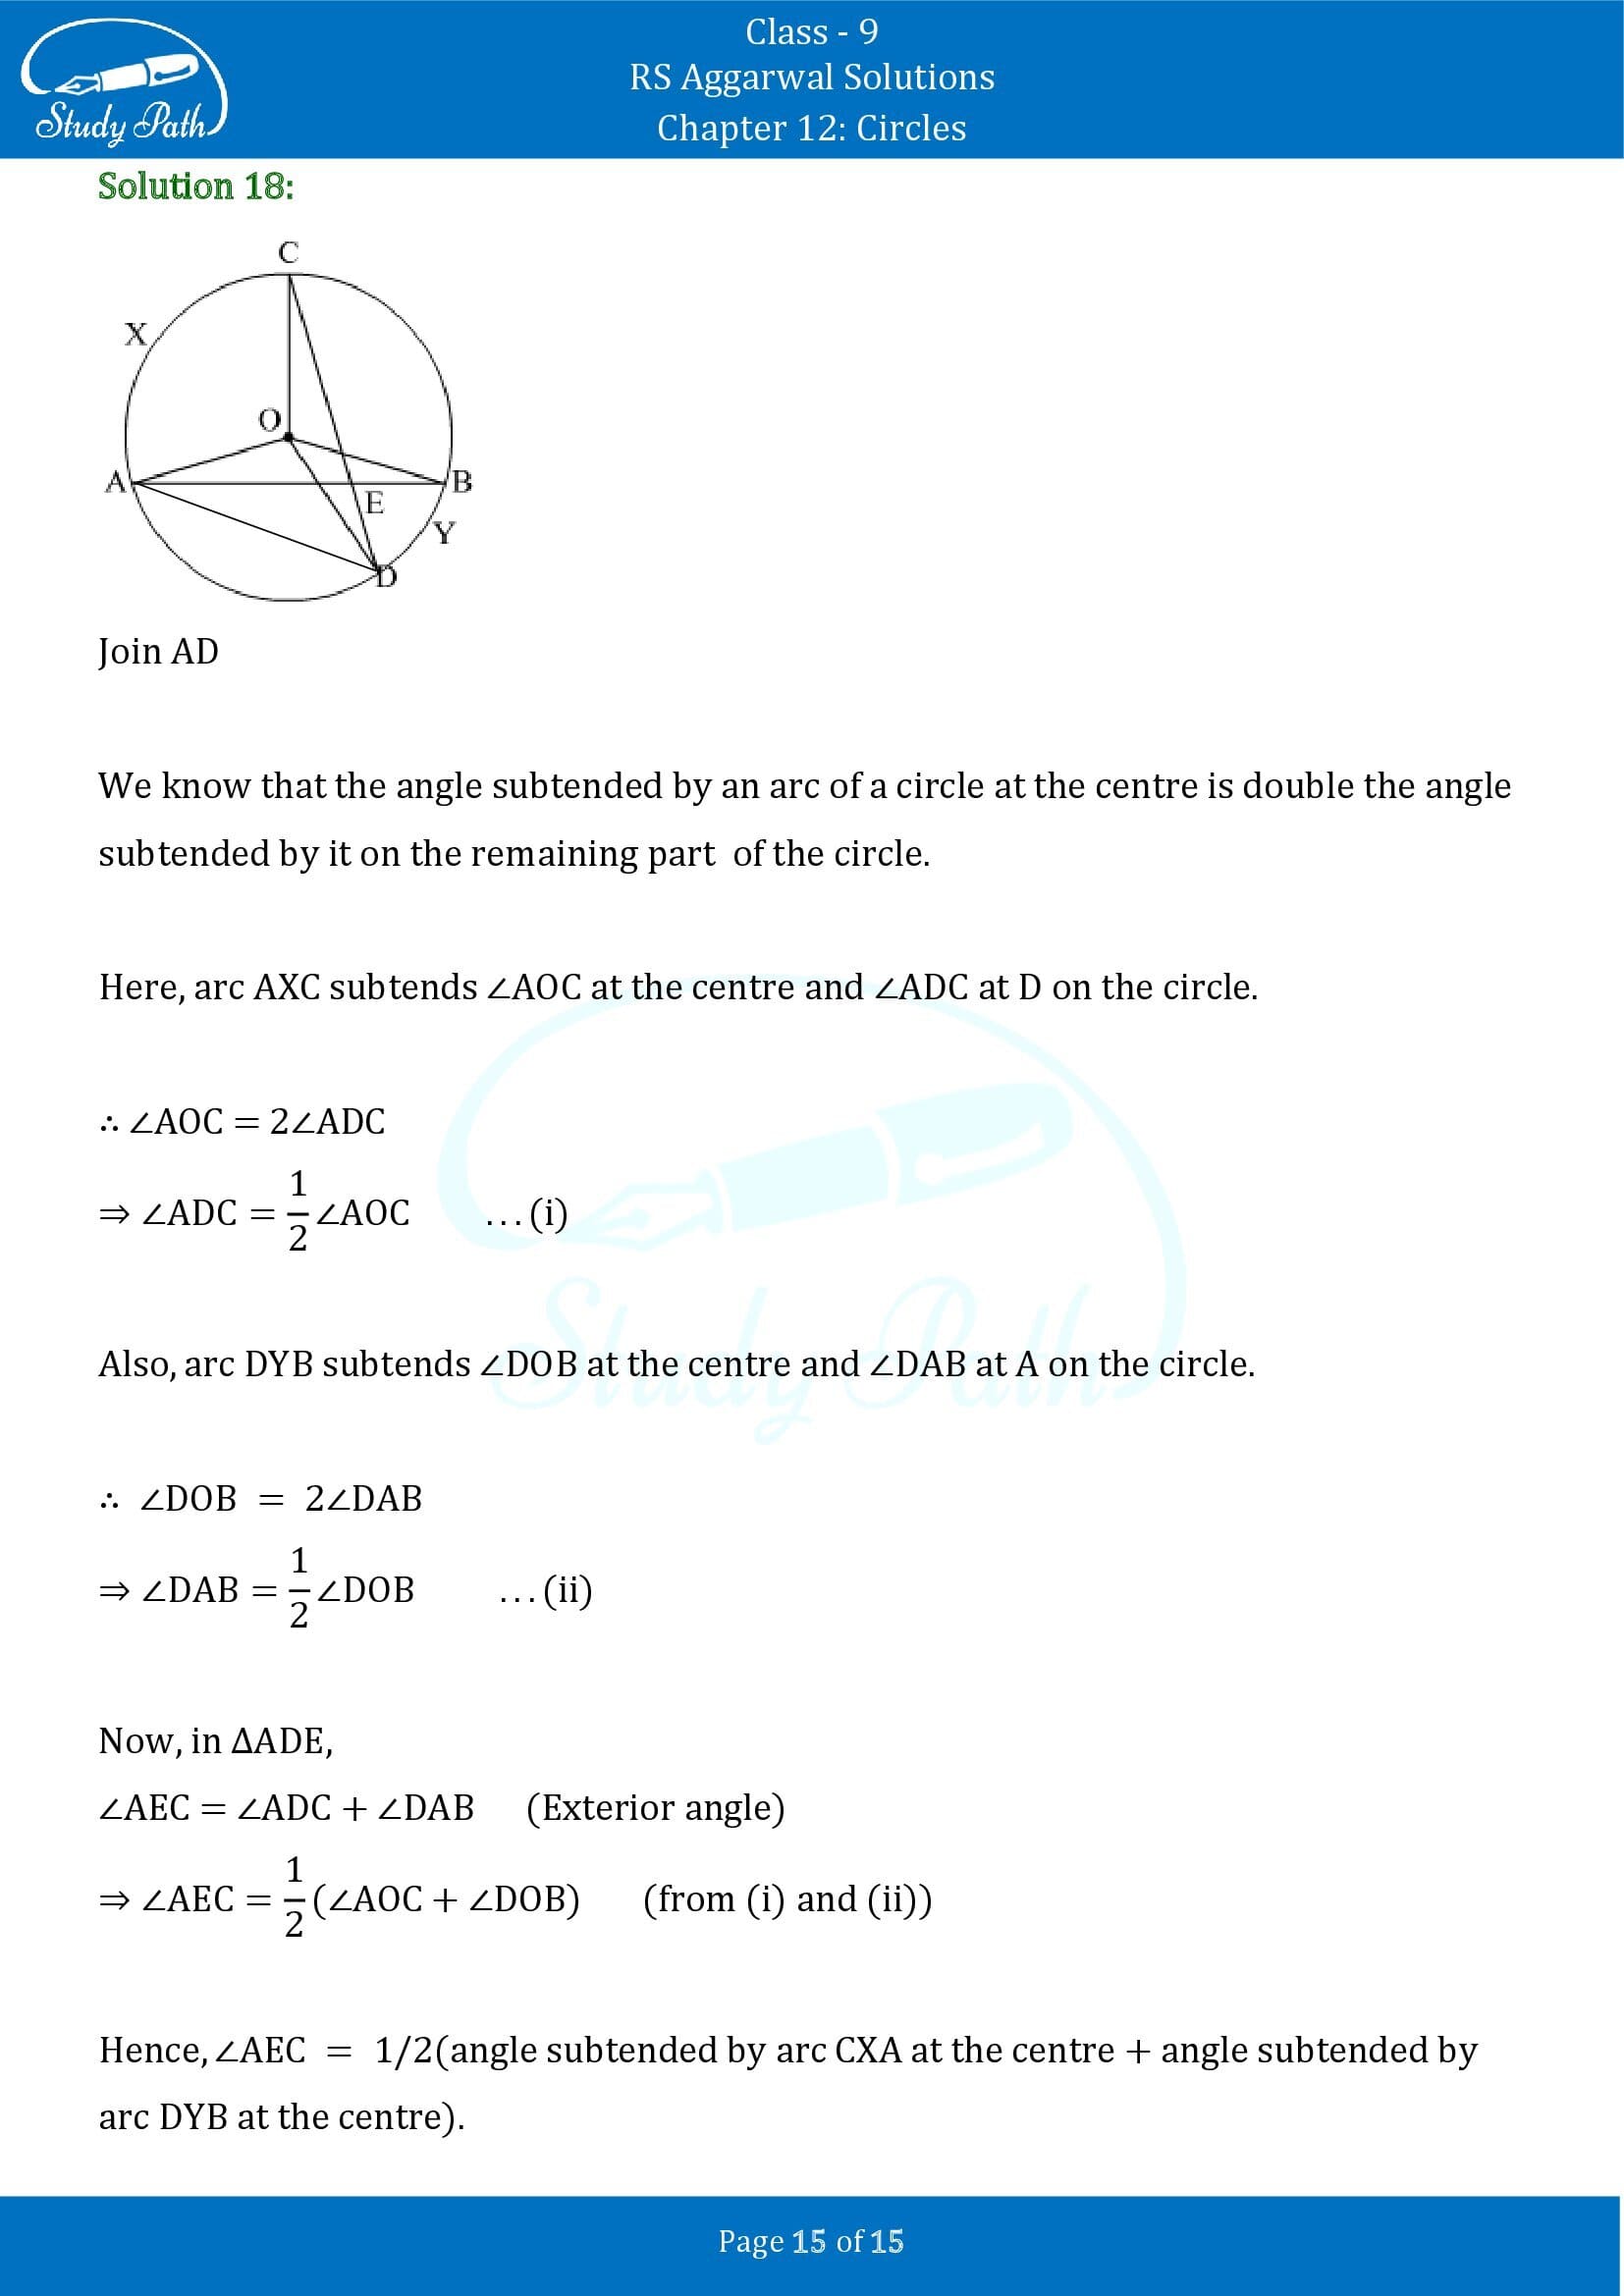 RS Aggarwal Solutions Class 9 Chapter 12 Circles Exercise 12B 00015